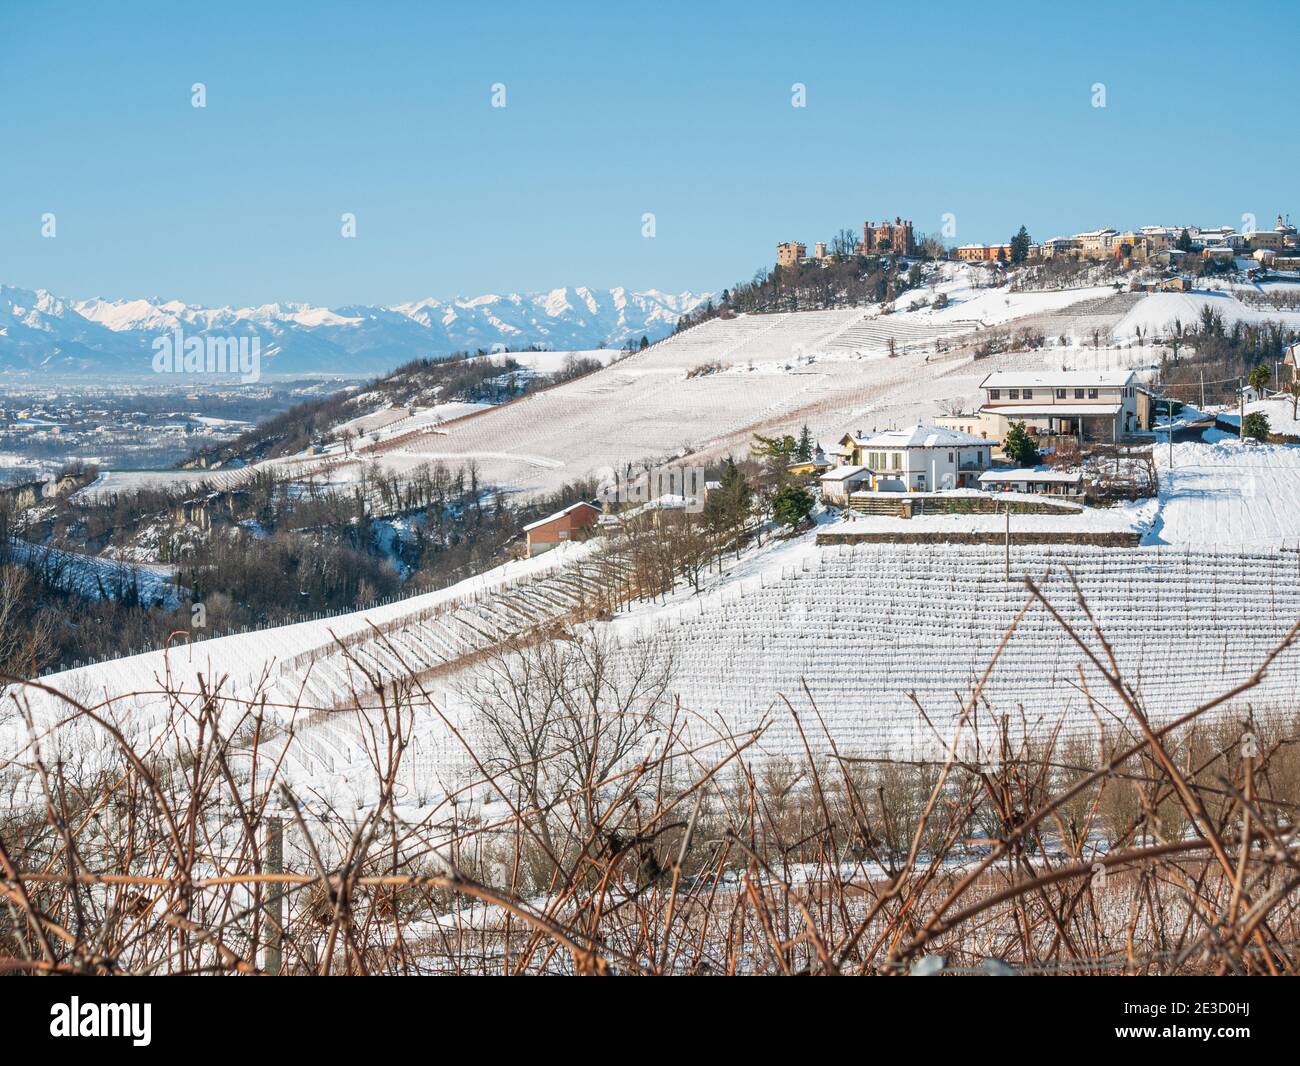 Italy Piedmont: Barolo wine yards unique landscape winter, Novello medieval village castle on hill top, the Alps snow capped mountains background, ita Stock Photo